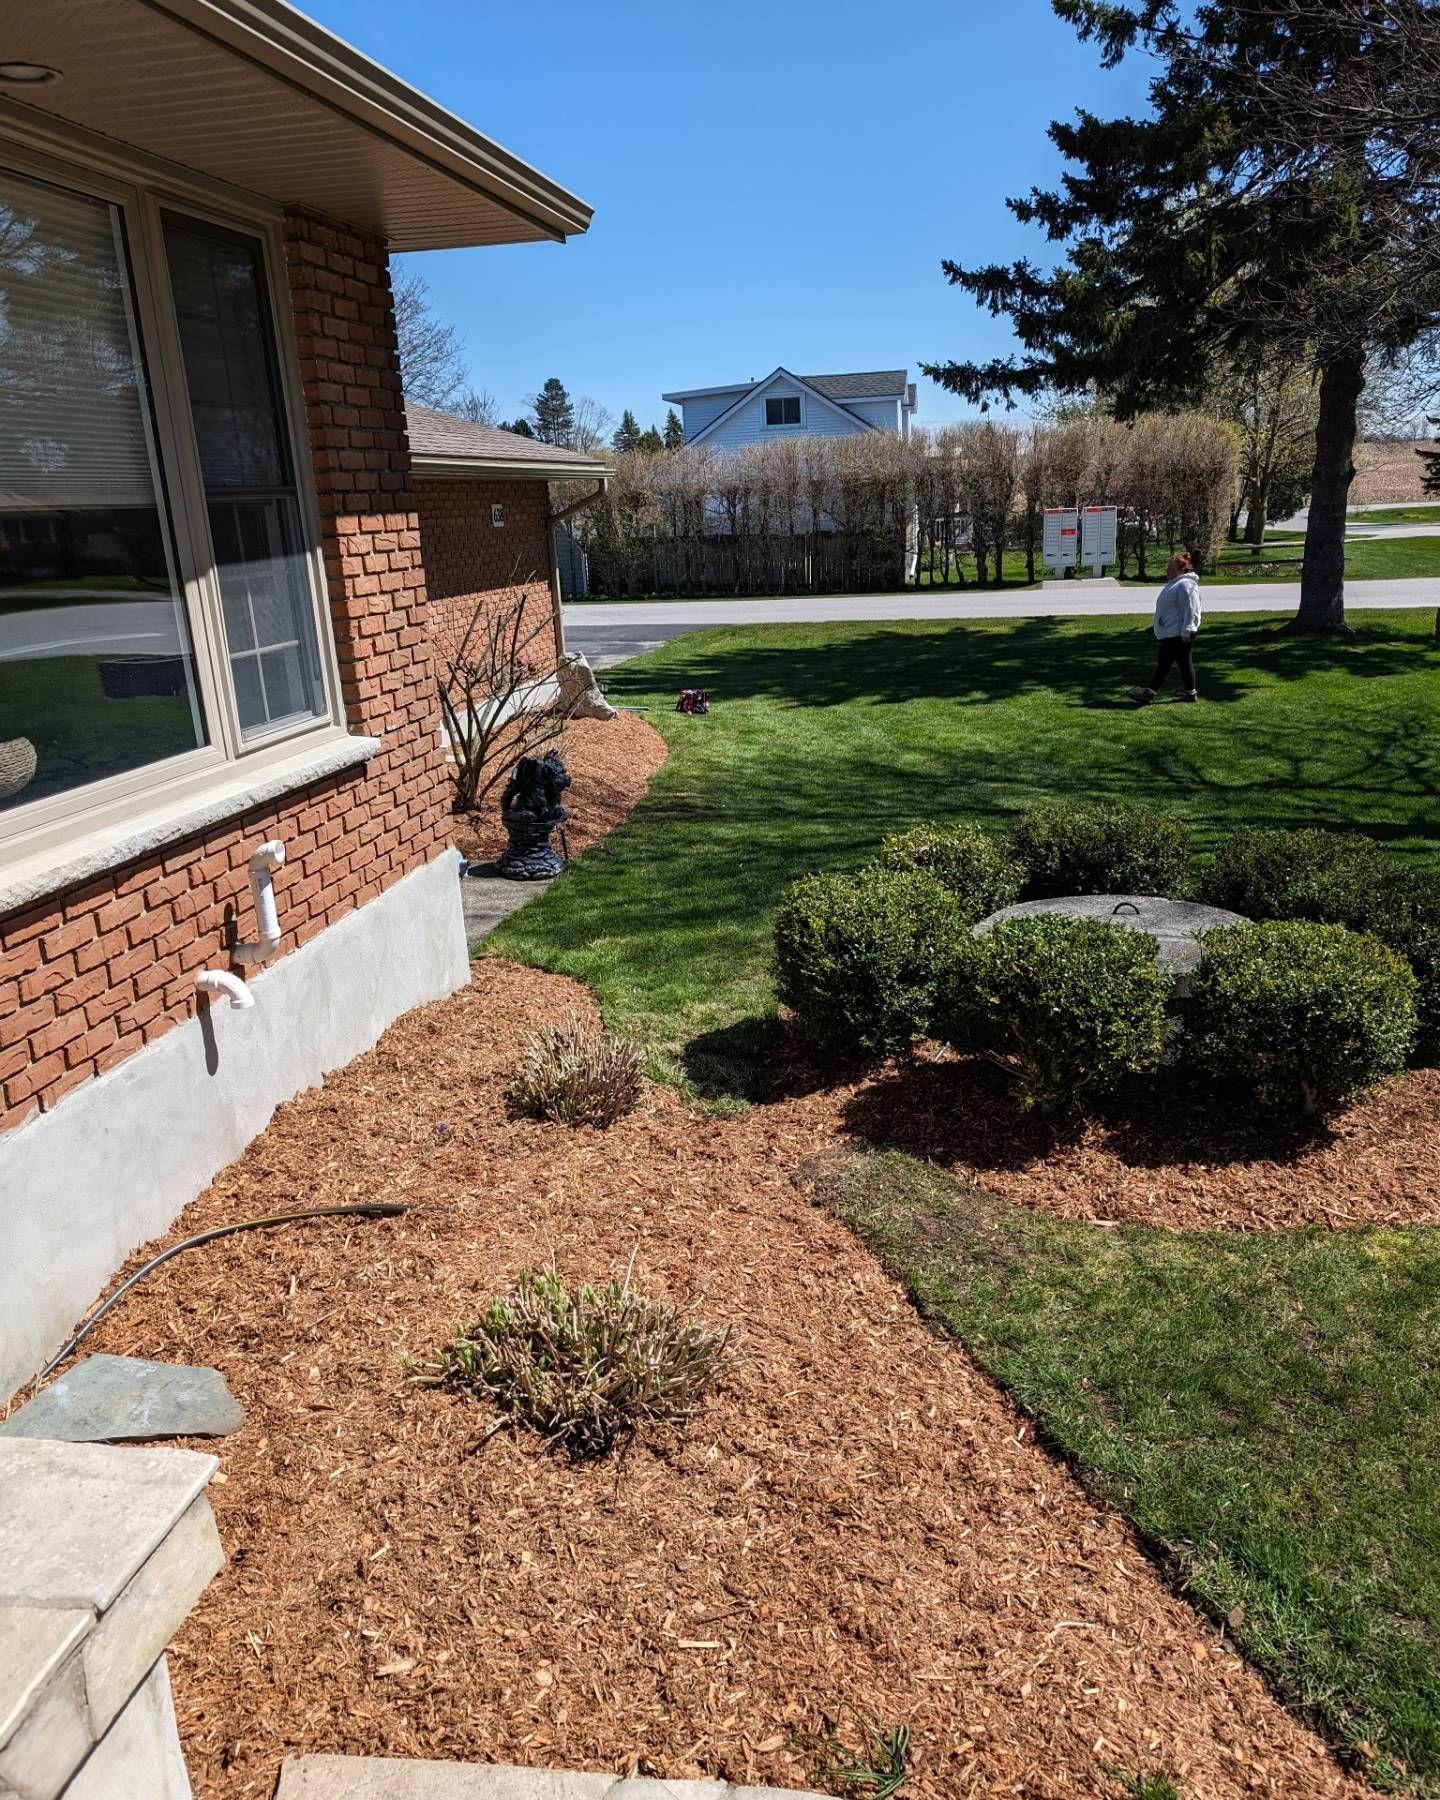 Had a helper to get this job done quick after a dull dreary morning to get it knocked off the list! #thanksbabe #helpinghands #gardenmakeover #edging #mulch #weeding #friendssupportfriends #supportsmallbusiness #supportlocal #townofgoderich #portofgoderich #surroundingareas #nailedit